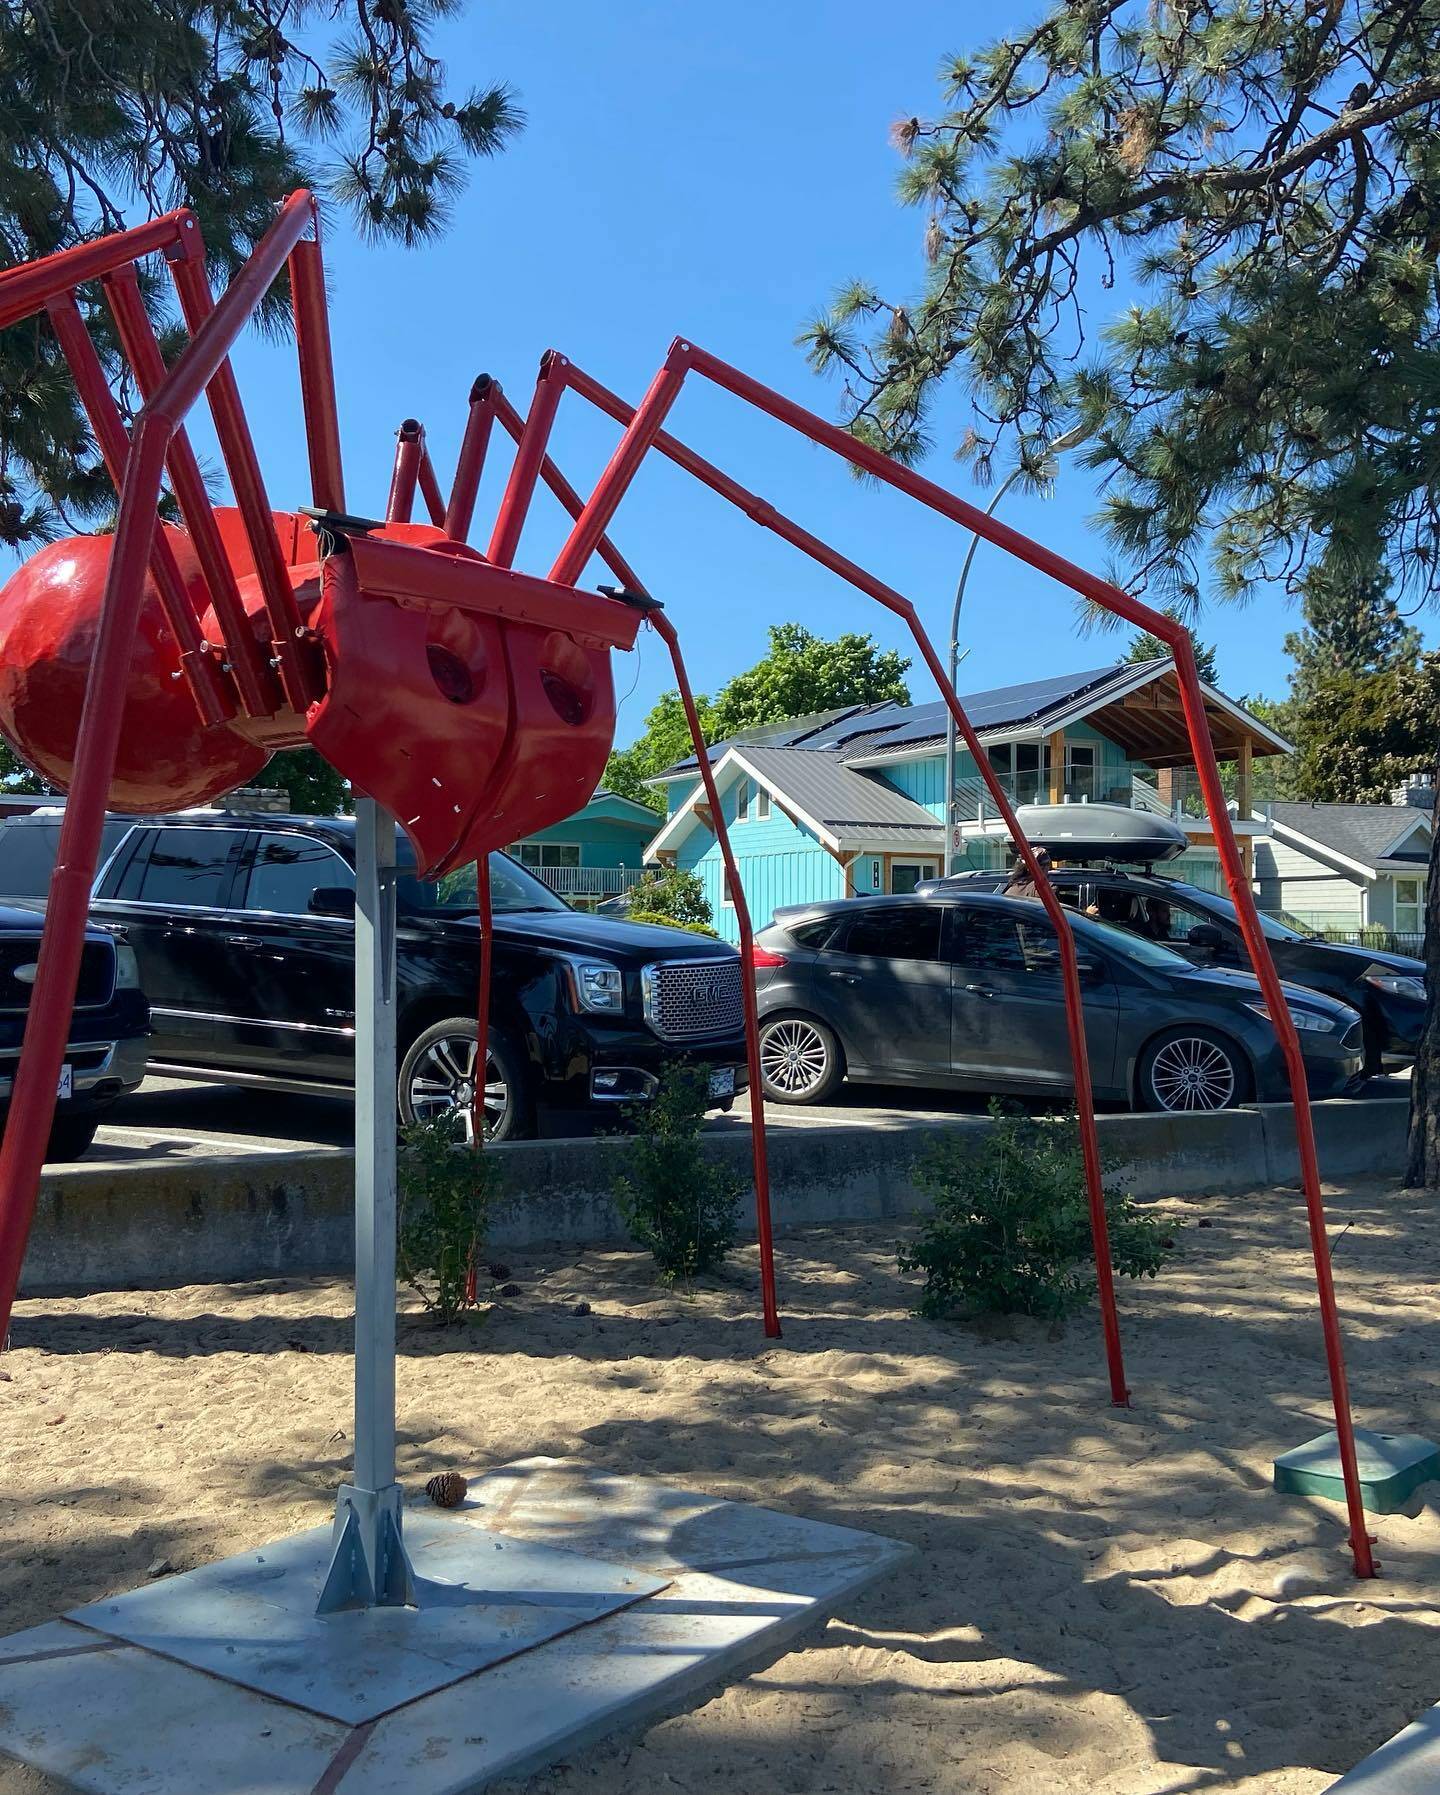 The recently installed GIGASPIDER sculpture at Okanagan Lake beach in Penticton was vandalized Sunday night or early Monday morning. (Monique Tamminga Western News)